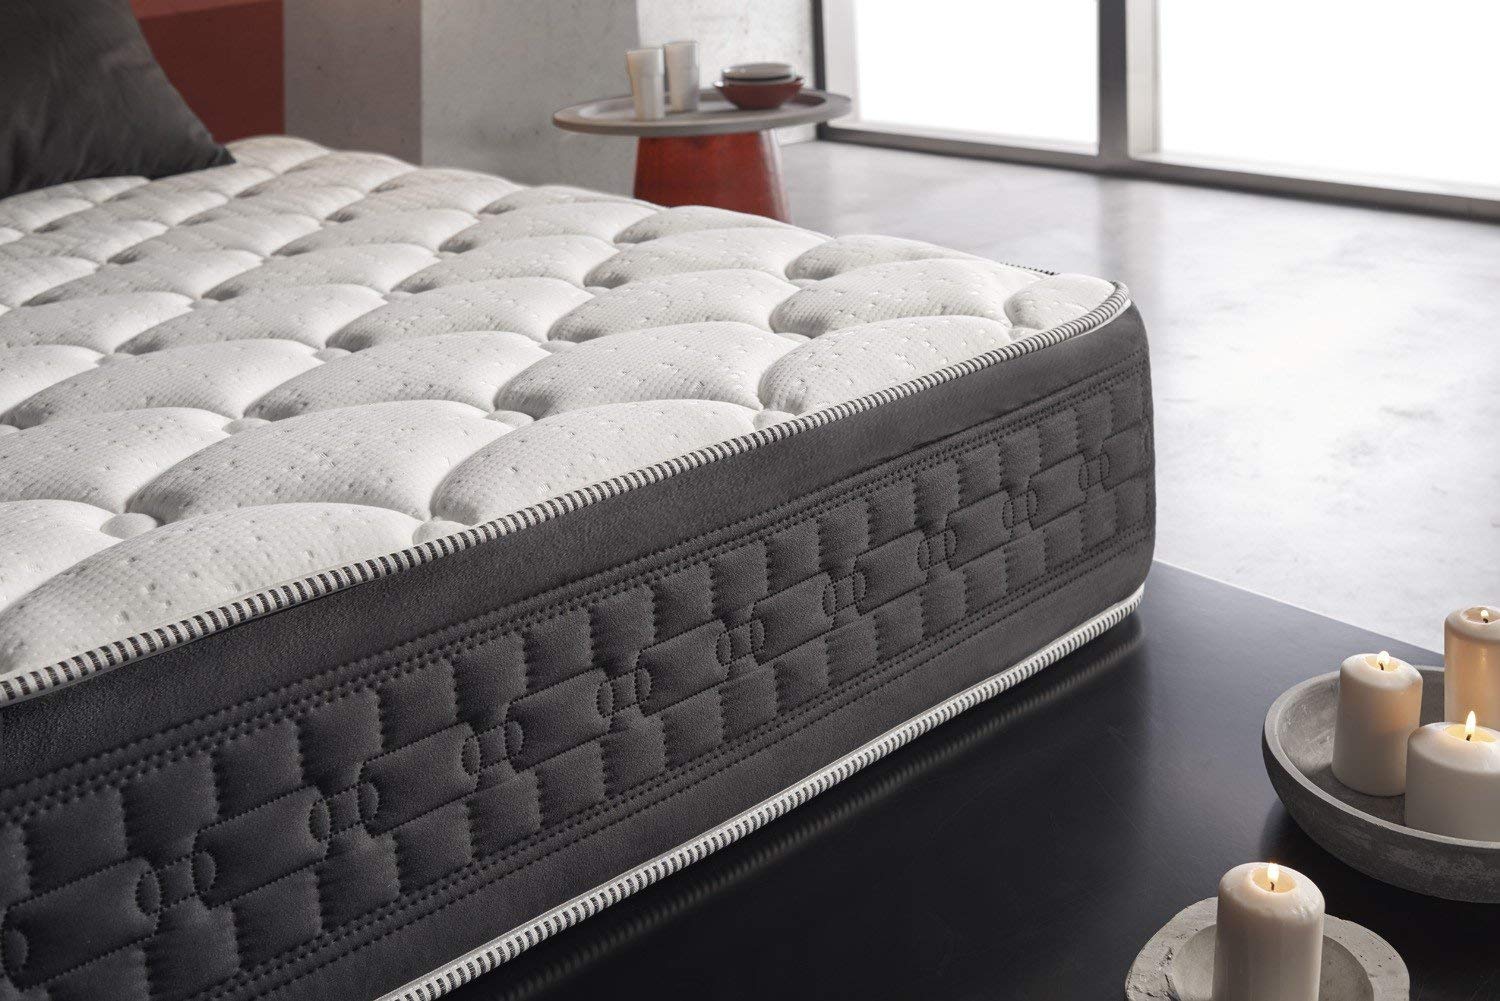 Simpur Relax Luxury Soothing Memory Foam Mattress Review